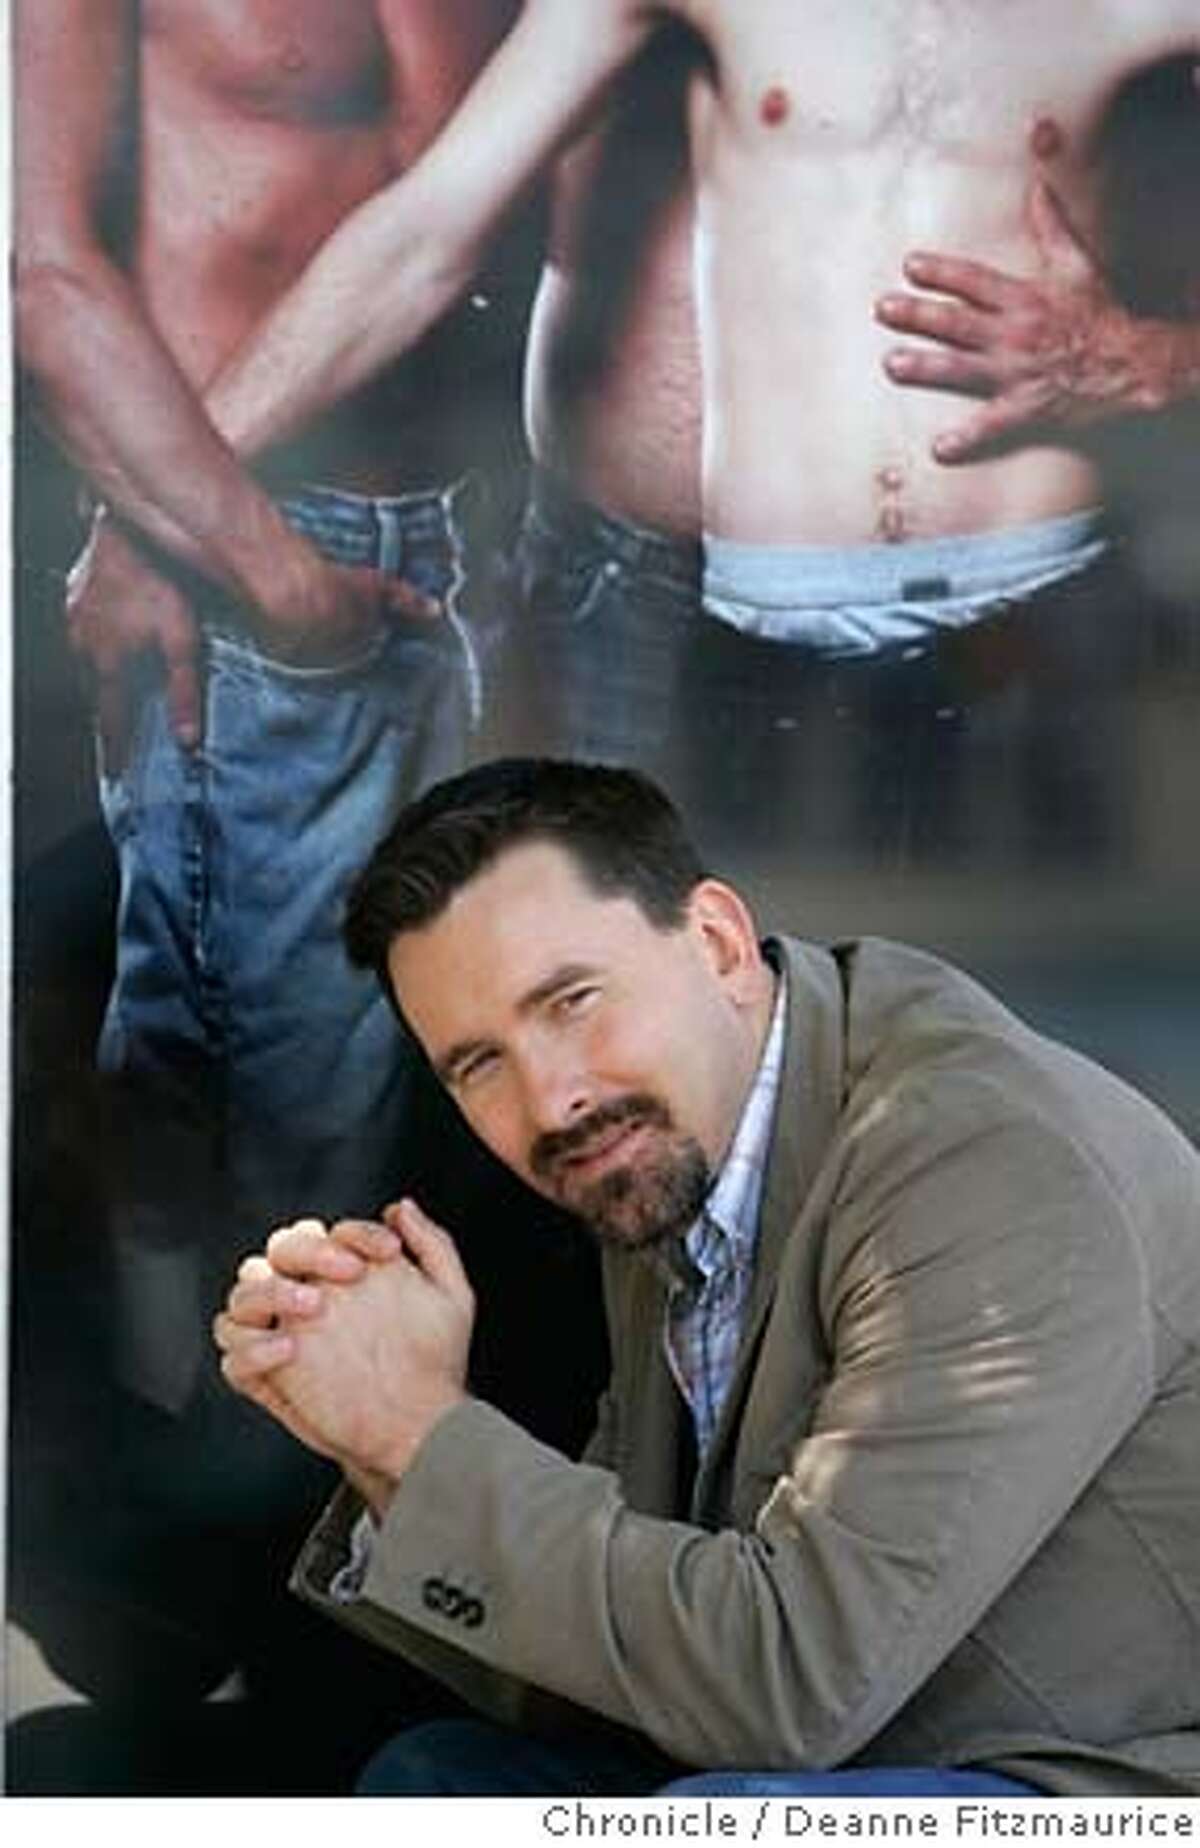 daddyhunt_0200_df.jpg Christopher Turner, 35, poses in front of a poster advertising his new website, daddyhunt.com which matches young gay men with older males. Deanne Fitzmaurice / The Chronicle Mandatory credit for photographer and San Francisco Chronicle. No Sales/Magazines out.